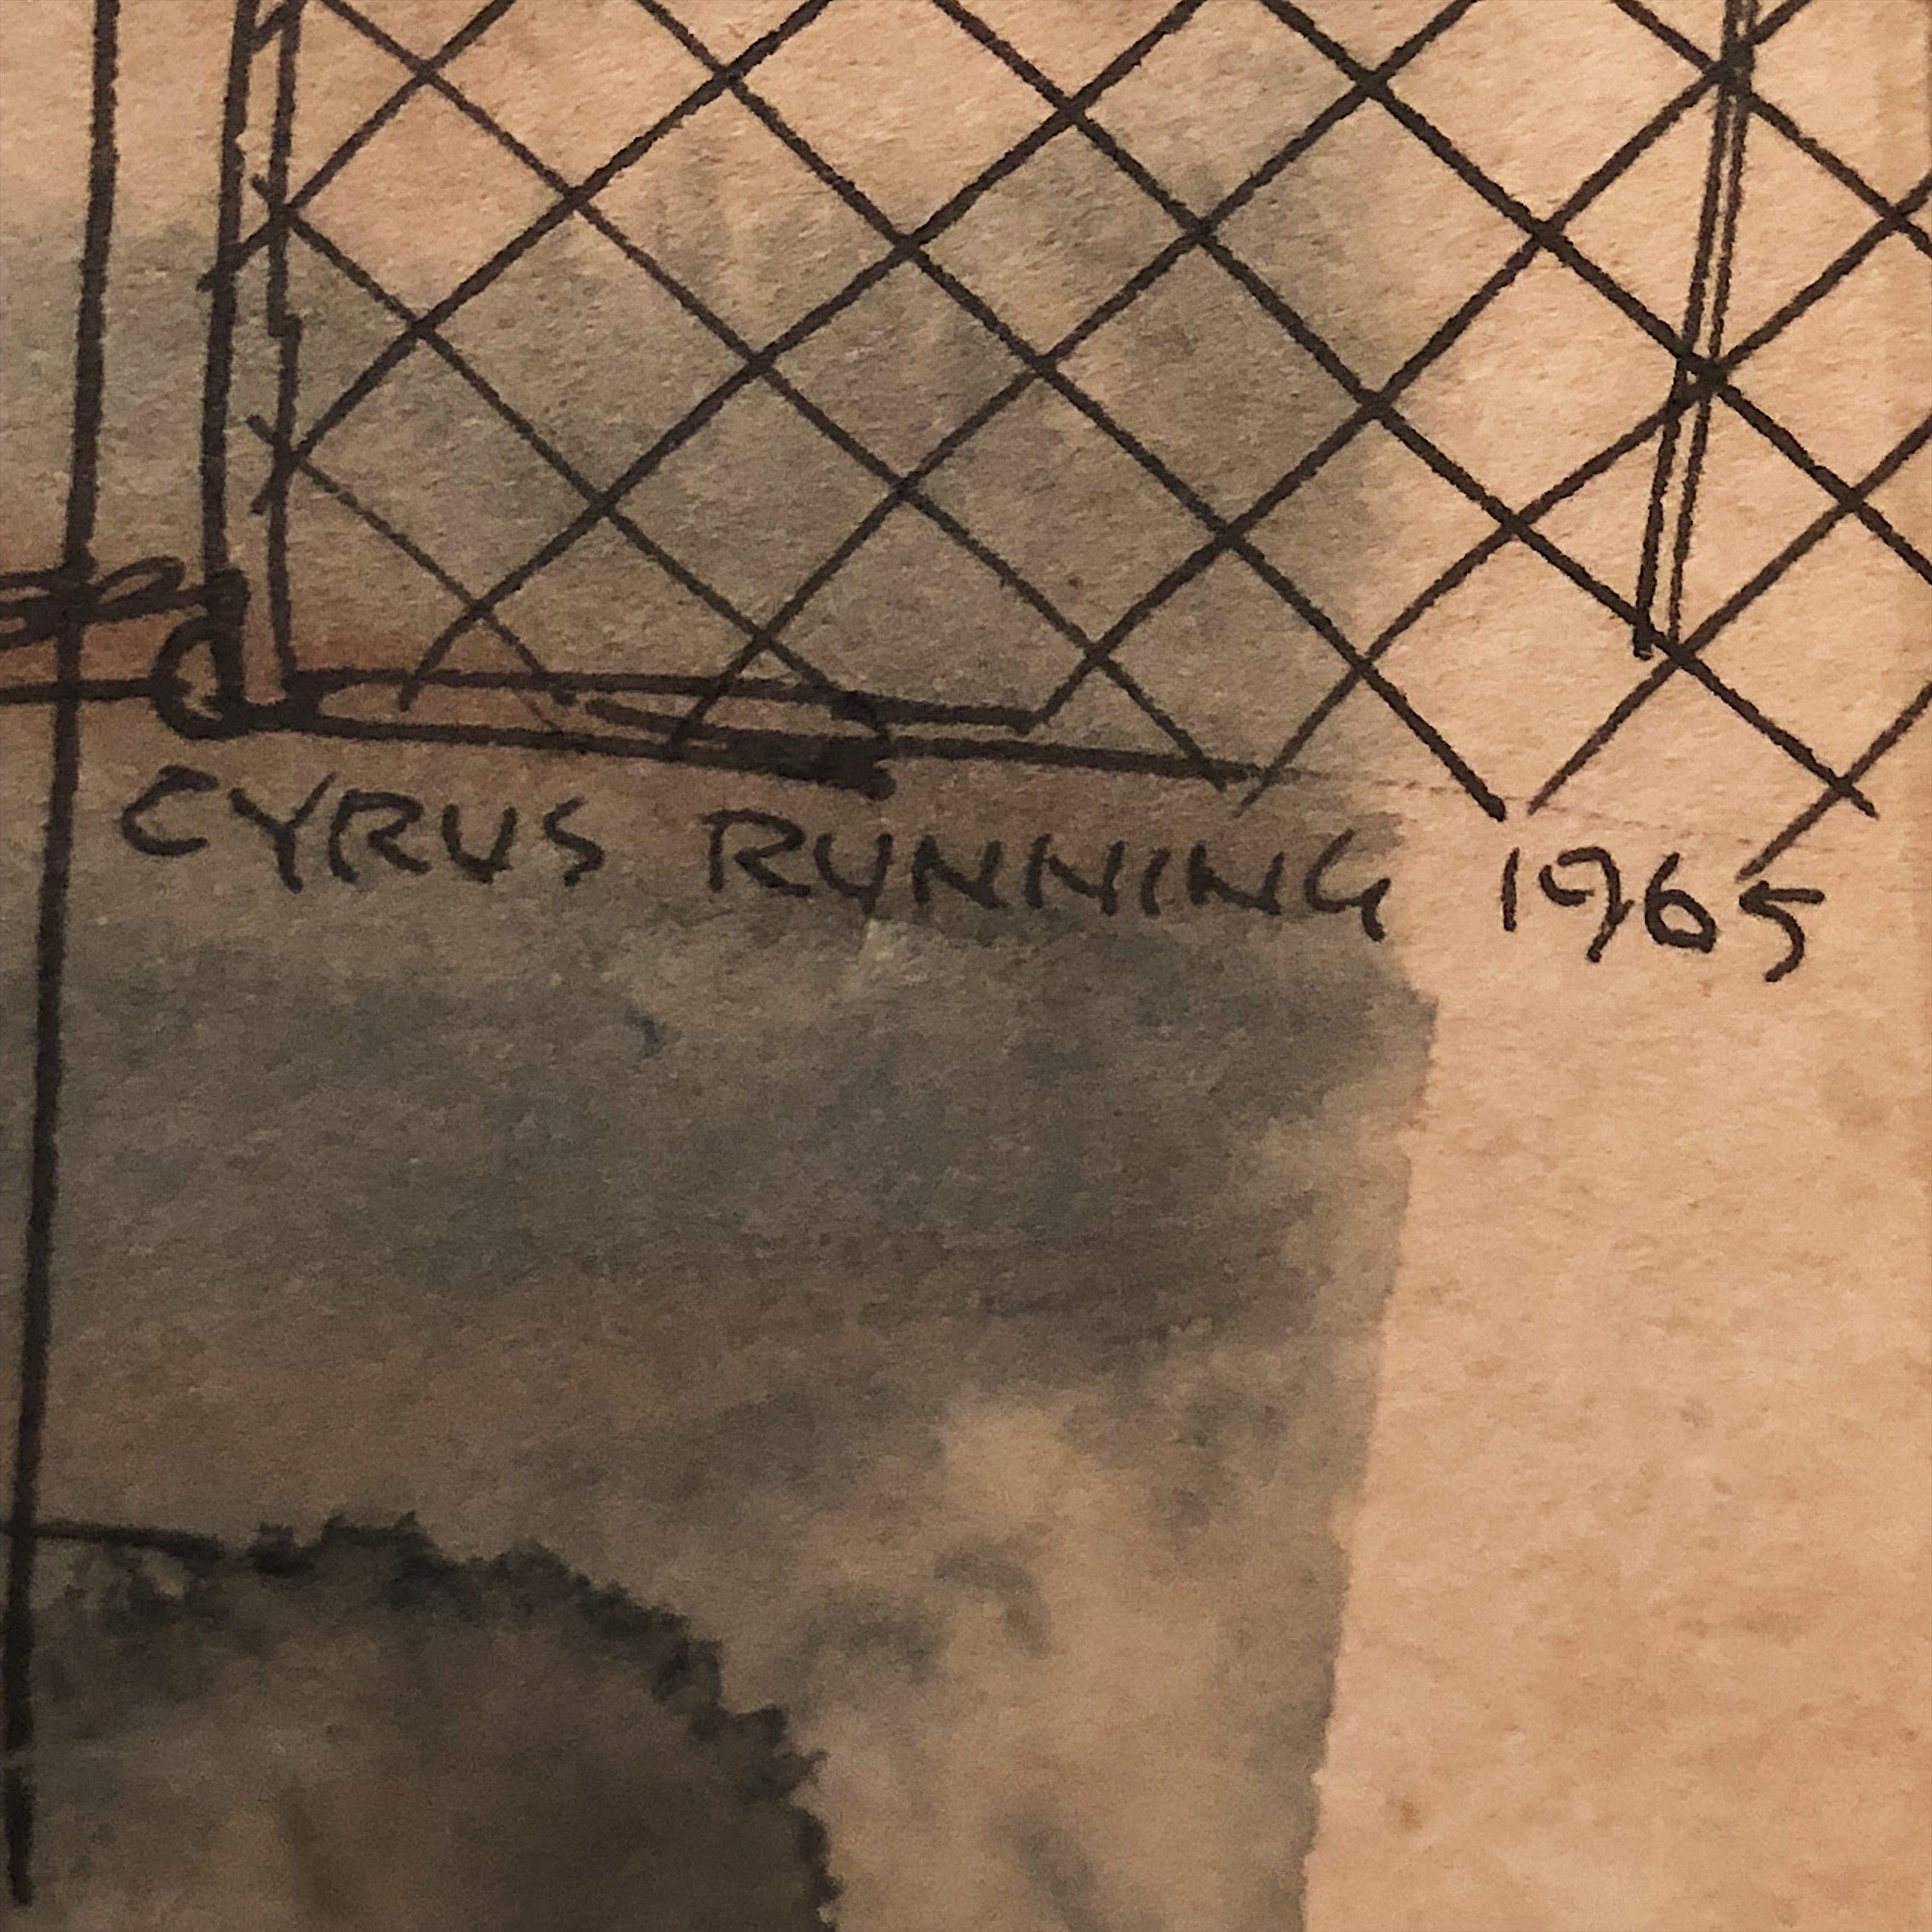 Signed and Dated 1965 by Cyrus Running